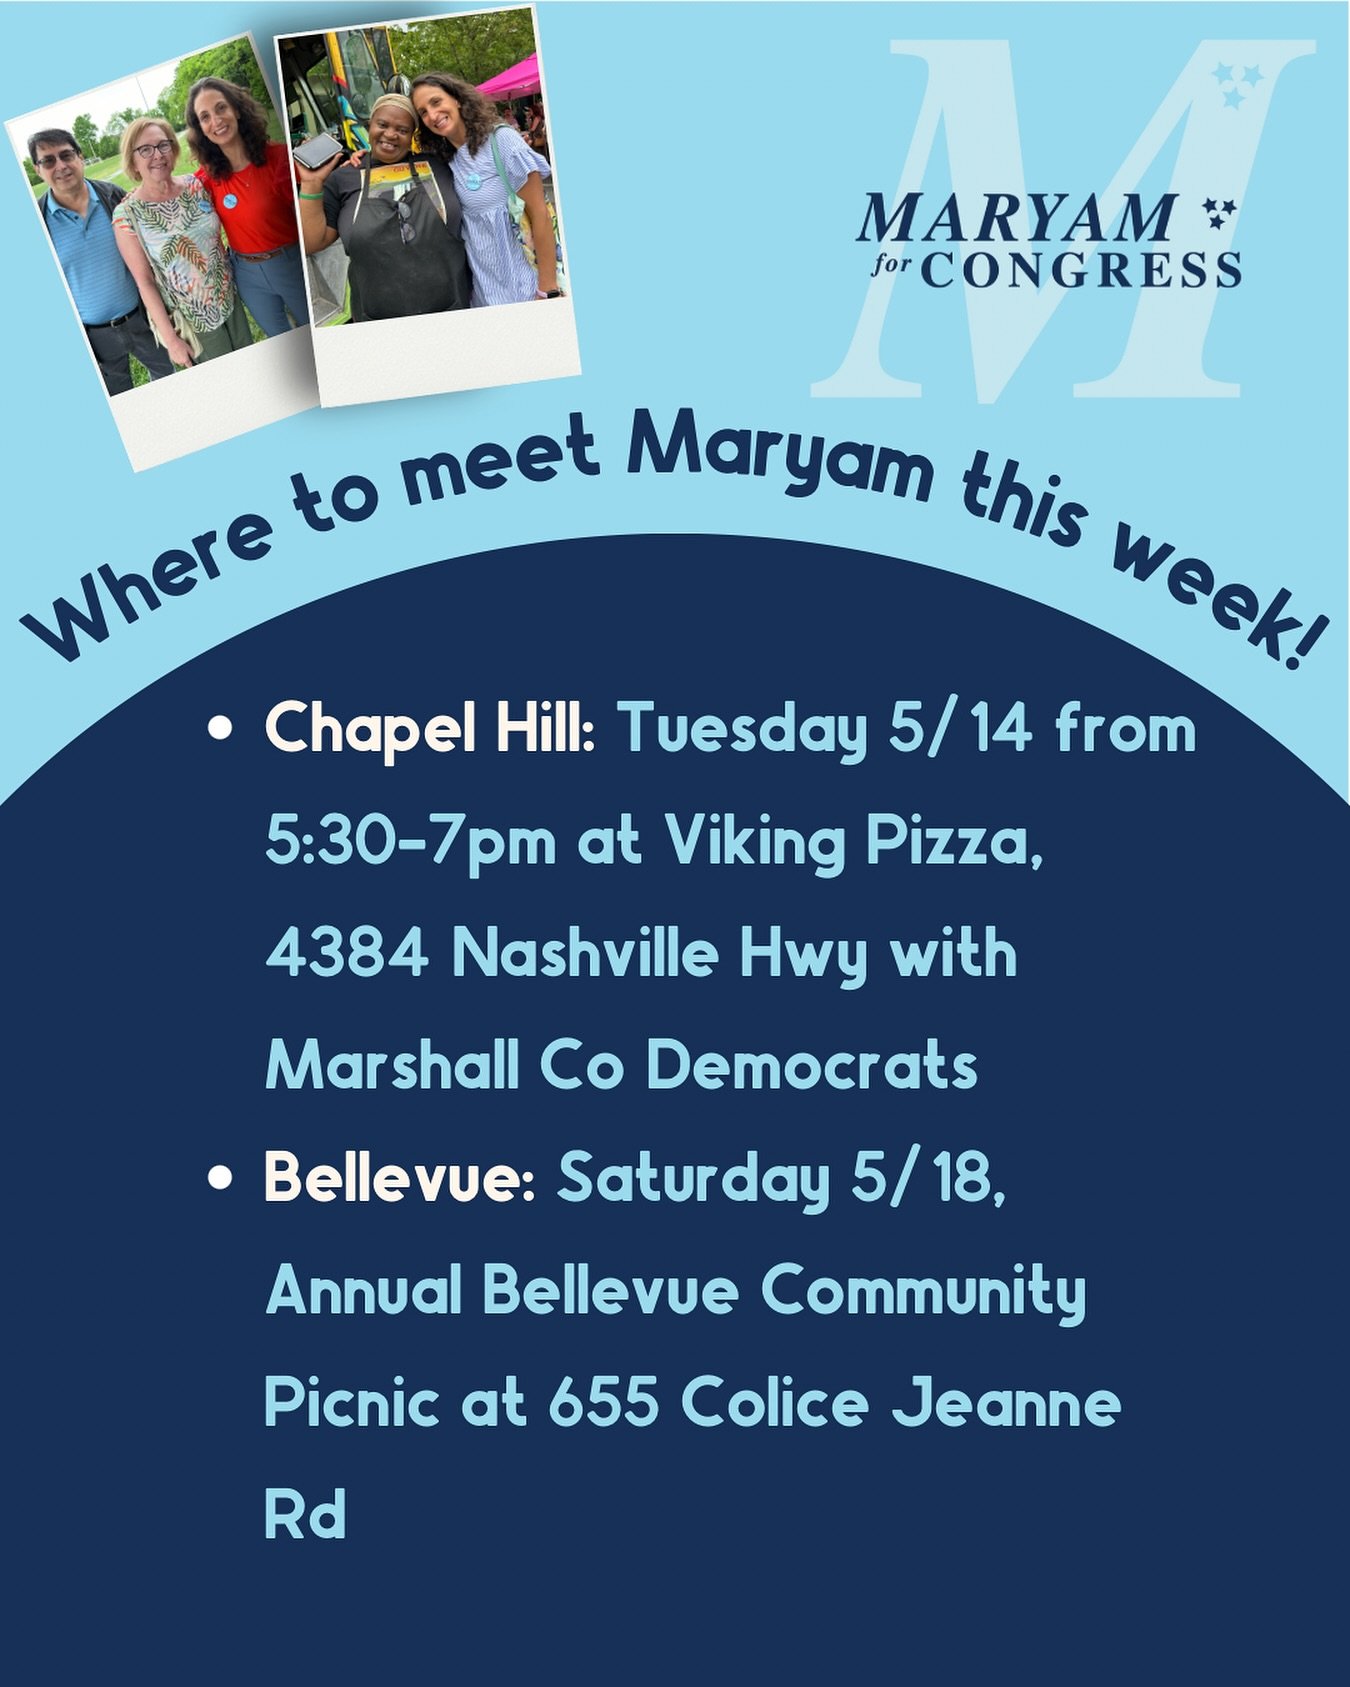 Week of 5/13! See you in #BellevueTN and #MarshallCountyTN!

#maryamforcongress #thisisourfight